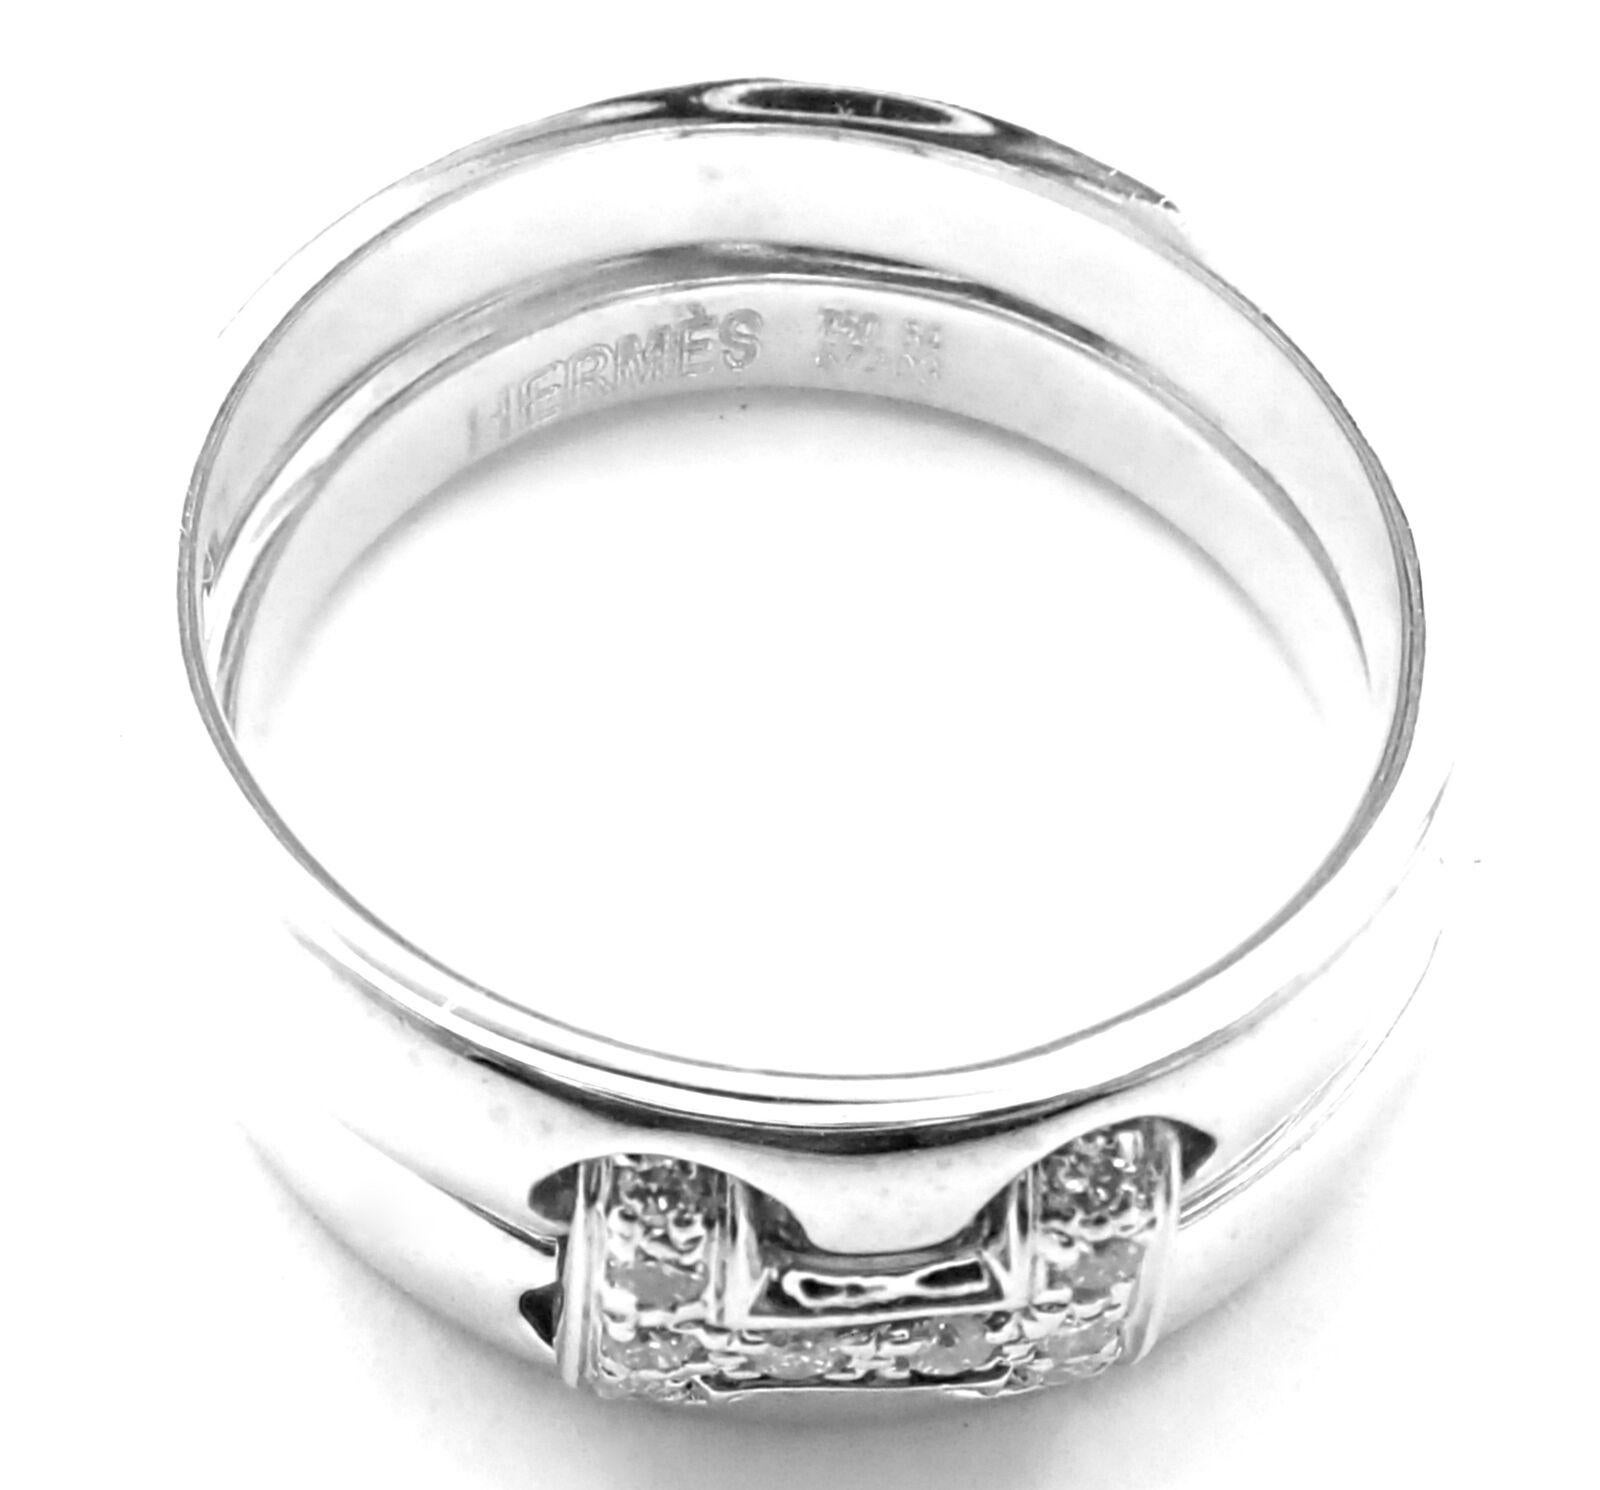 Hermes Diamond H Double Band Flex White Gold Ring In Excellent Condition For Sale In Holland, PA